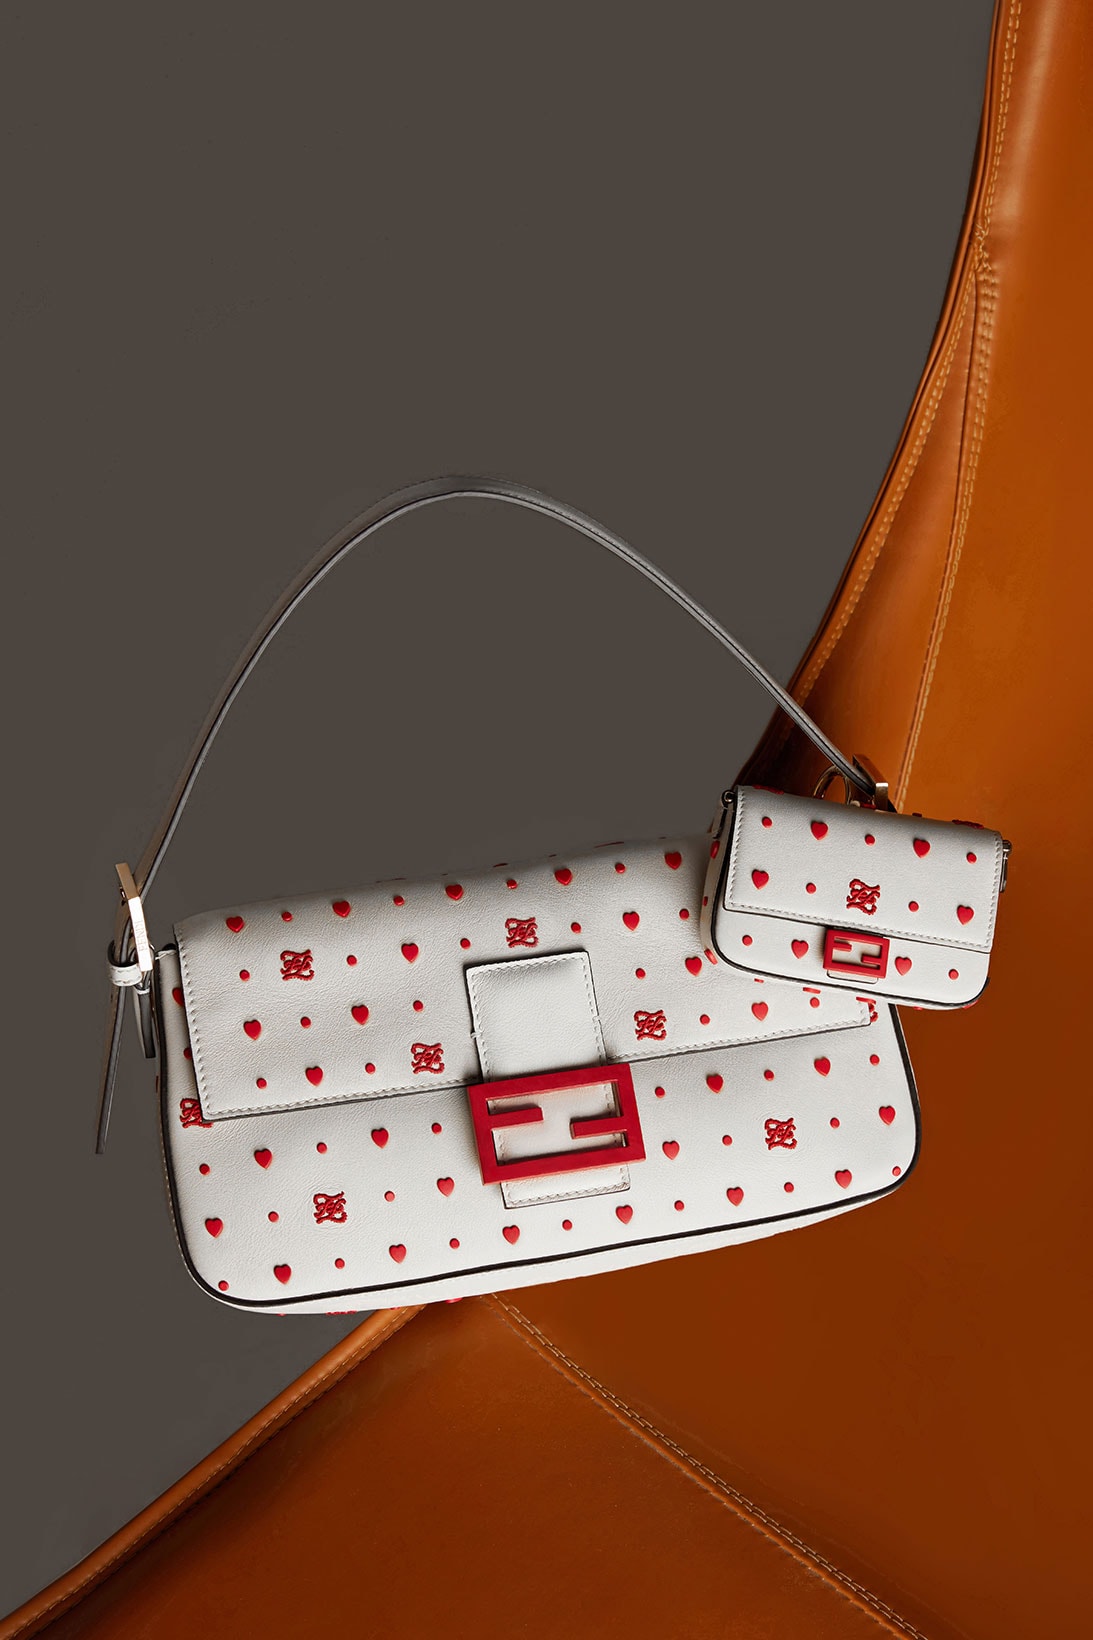 FENDI's Chinese New Year 2020 Capsule Collection - BagAddicts